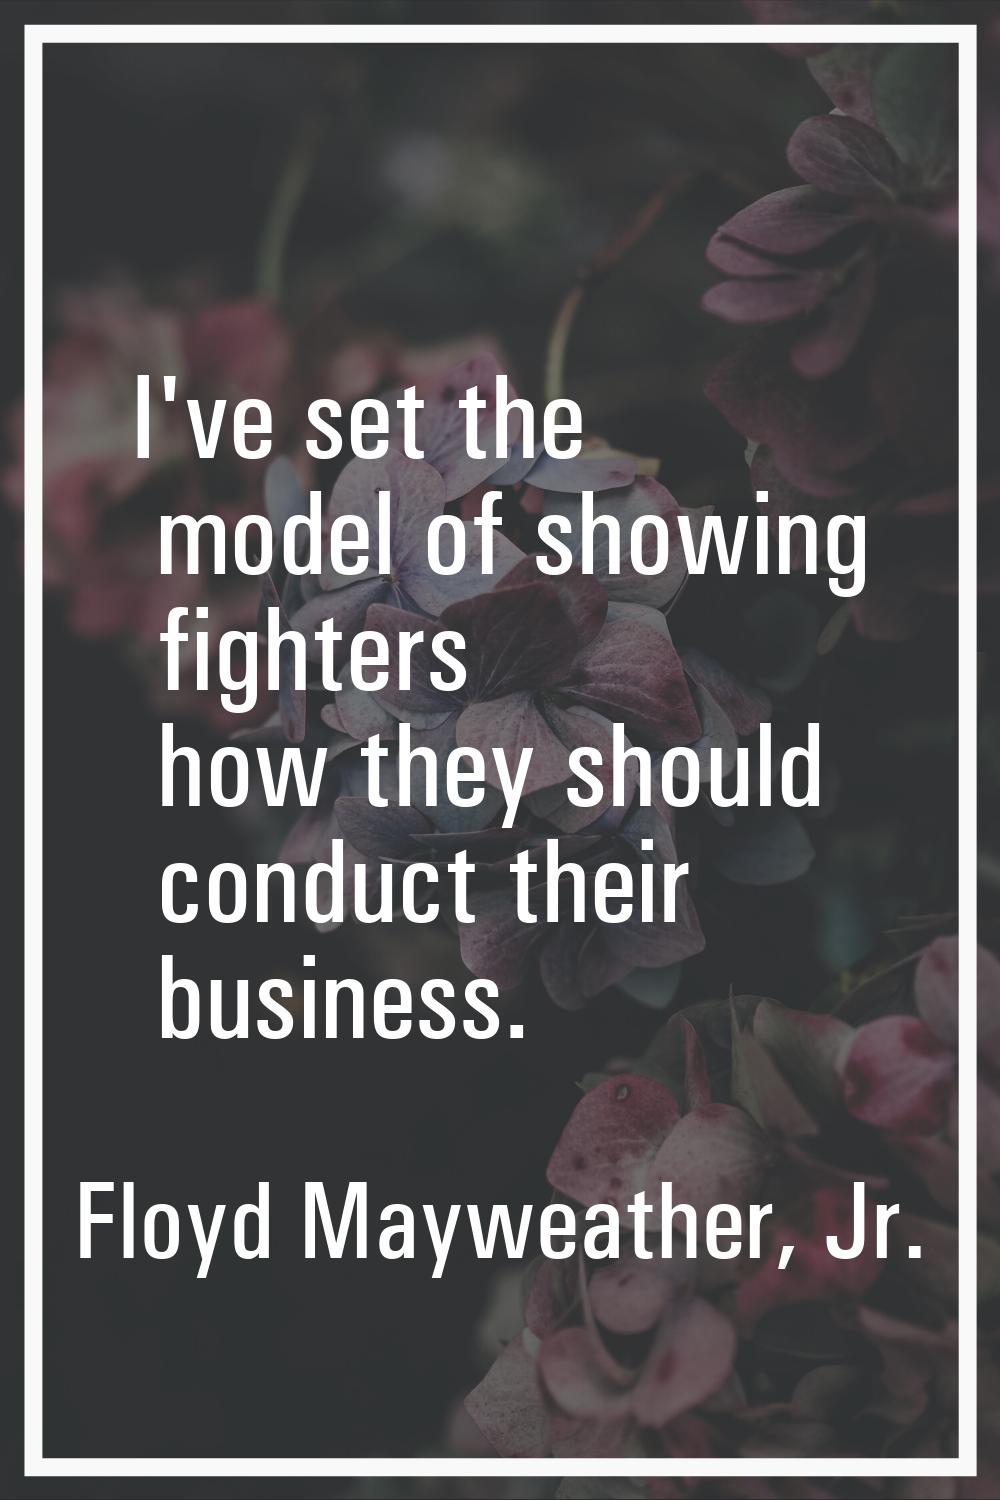 I've set the model of showing fighters how they should conduct their business.